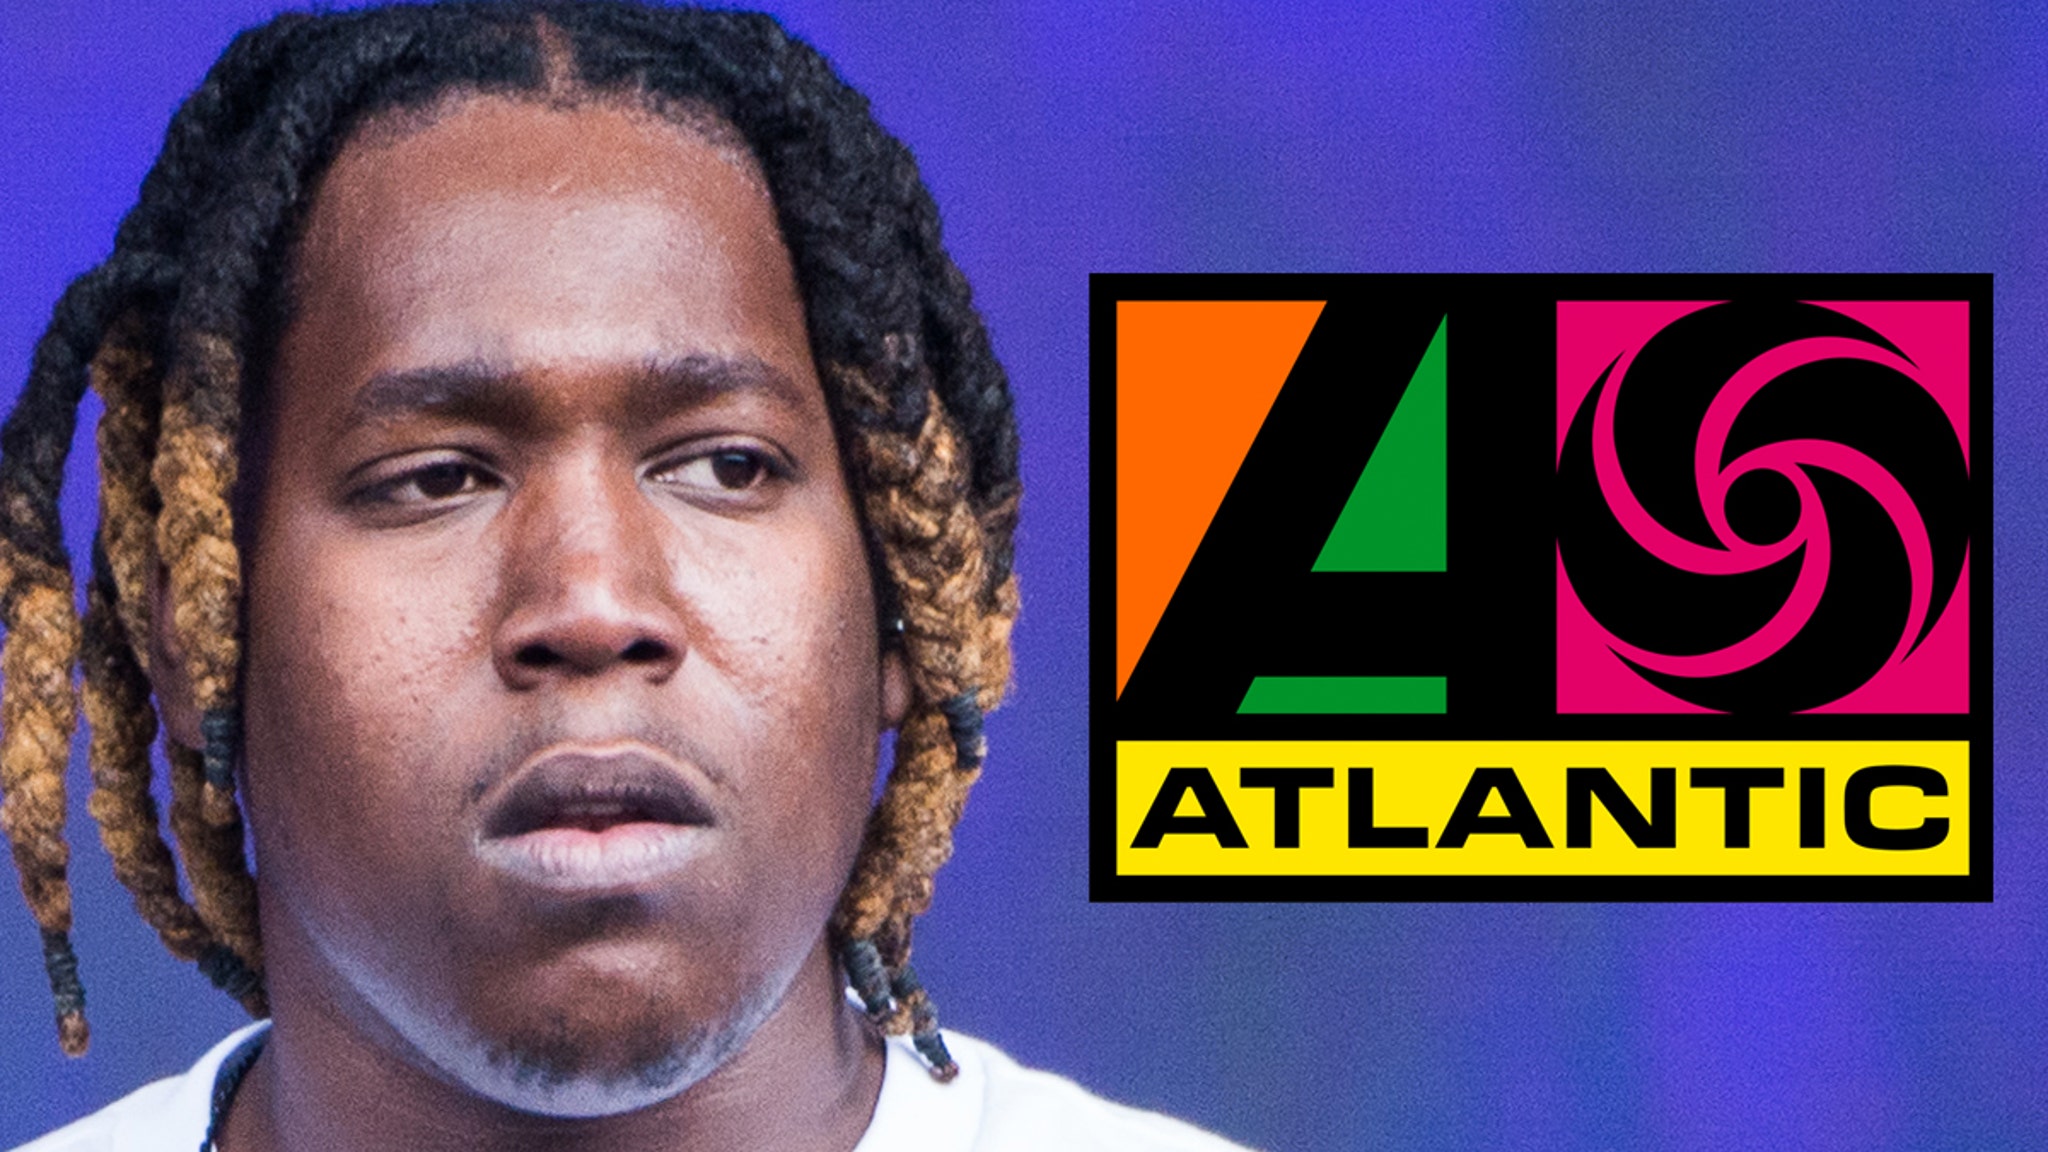 Atlantic denies using bots to press Don Toliver and other artists' videos